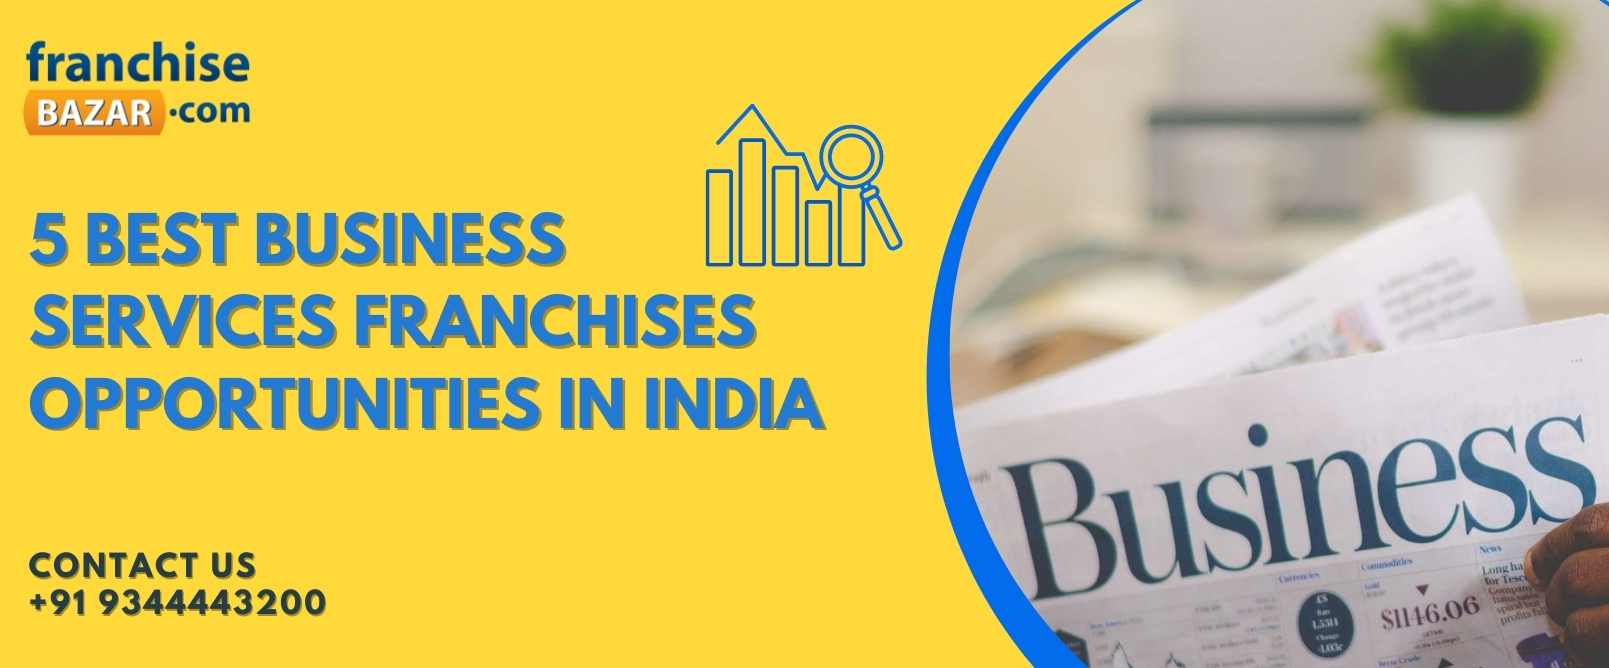 5 Best Business Services Franchises Opportunities In India	